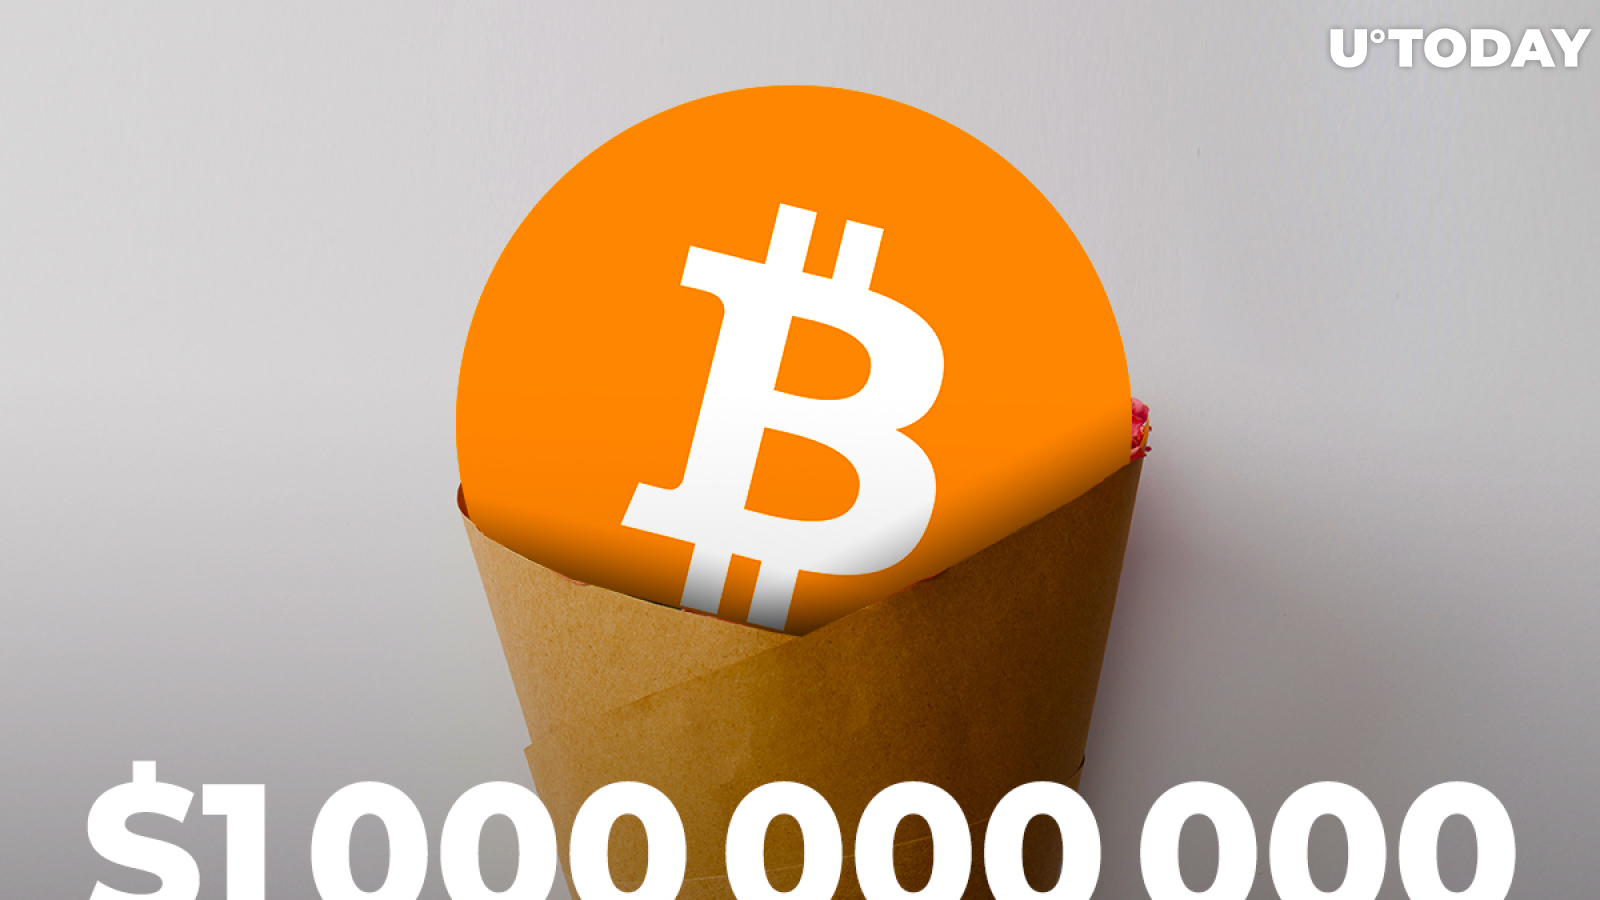 Wrapped Bitcoin Surpasses $1,000,000,000 as DeFi Protocols Reach $11,000,000,000 in Locked Value